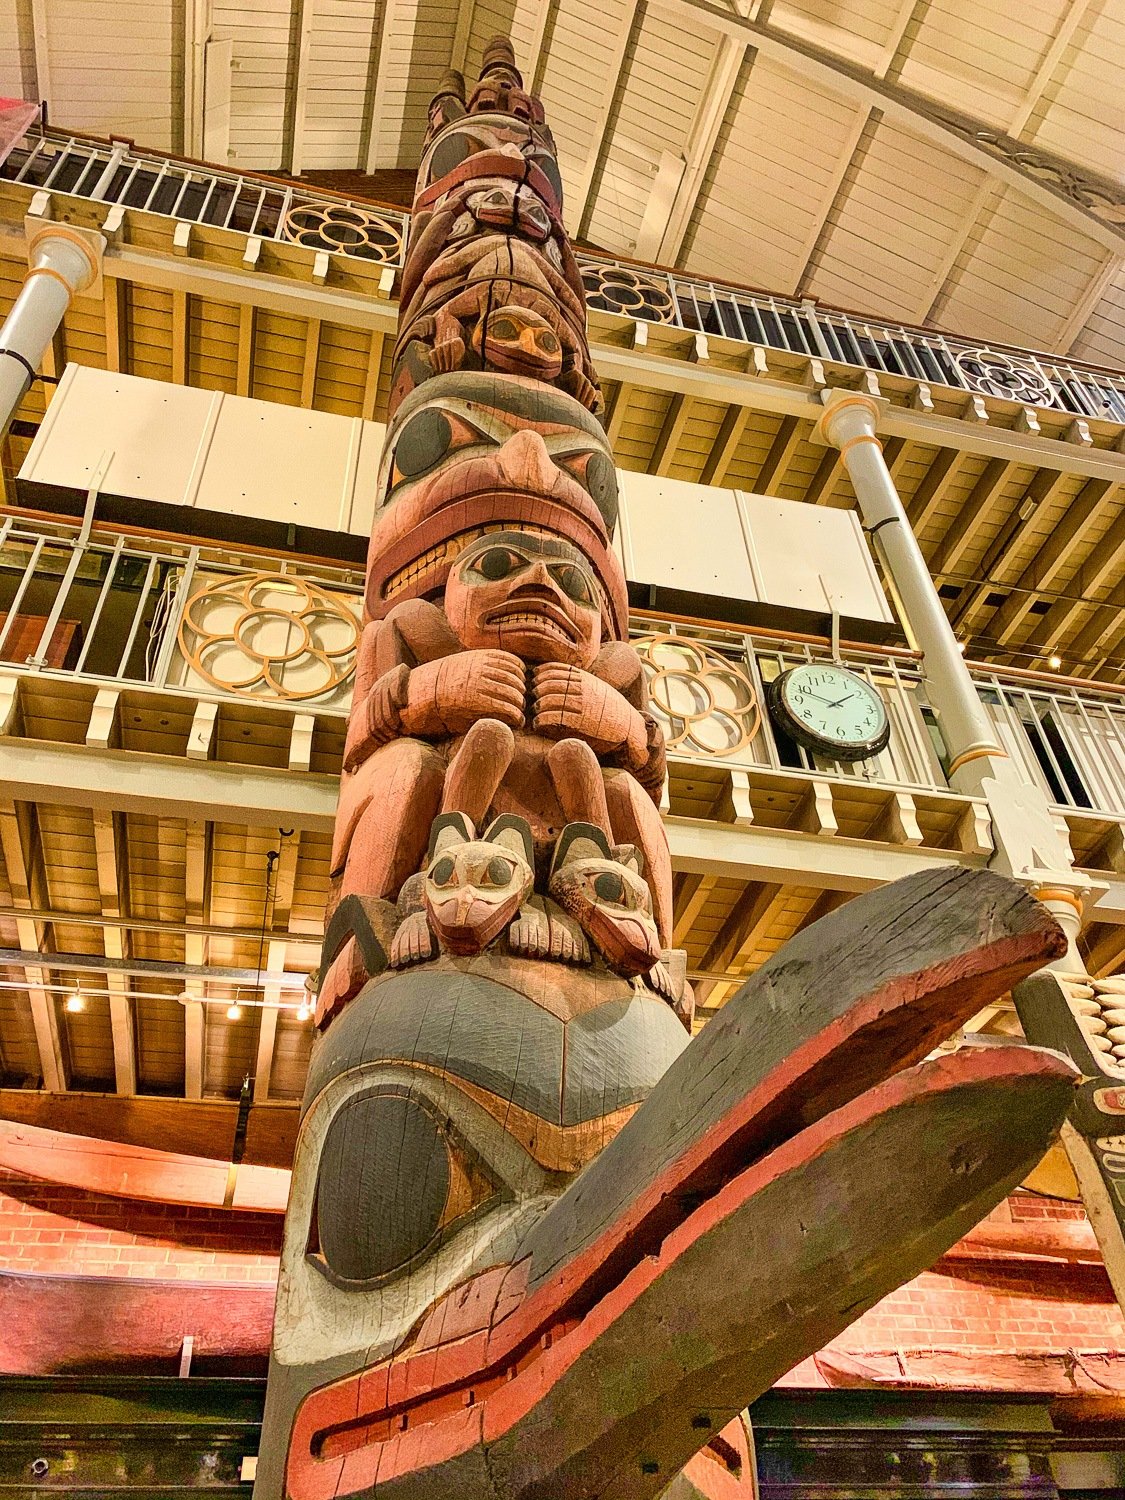 Totem Pole in the Pitt Rivers Museum